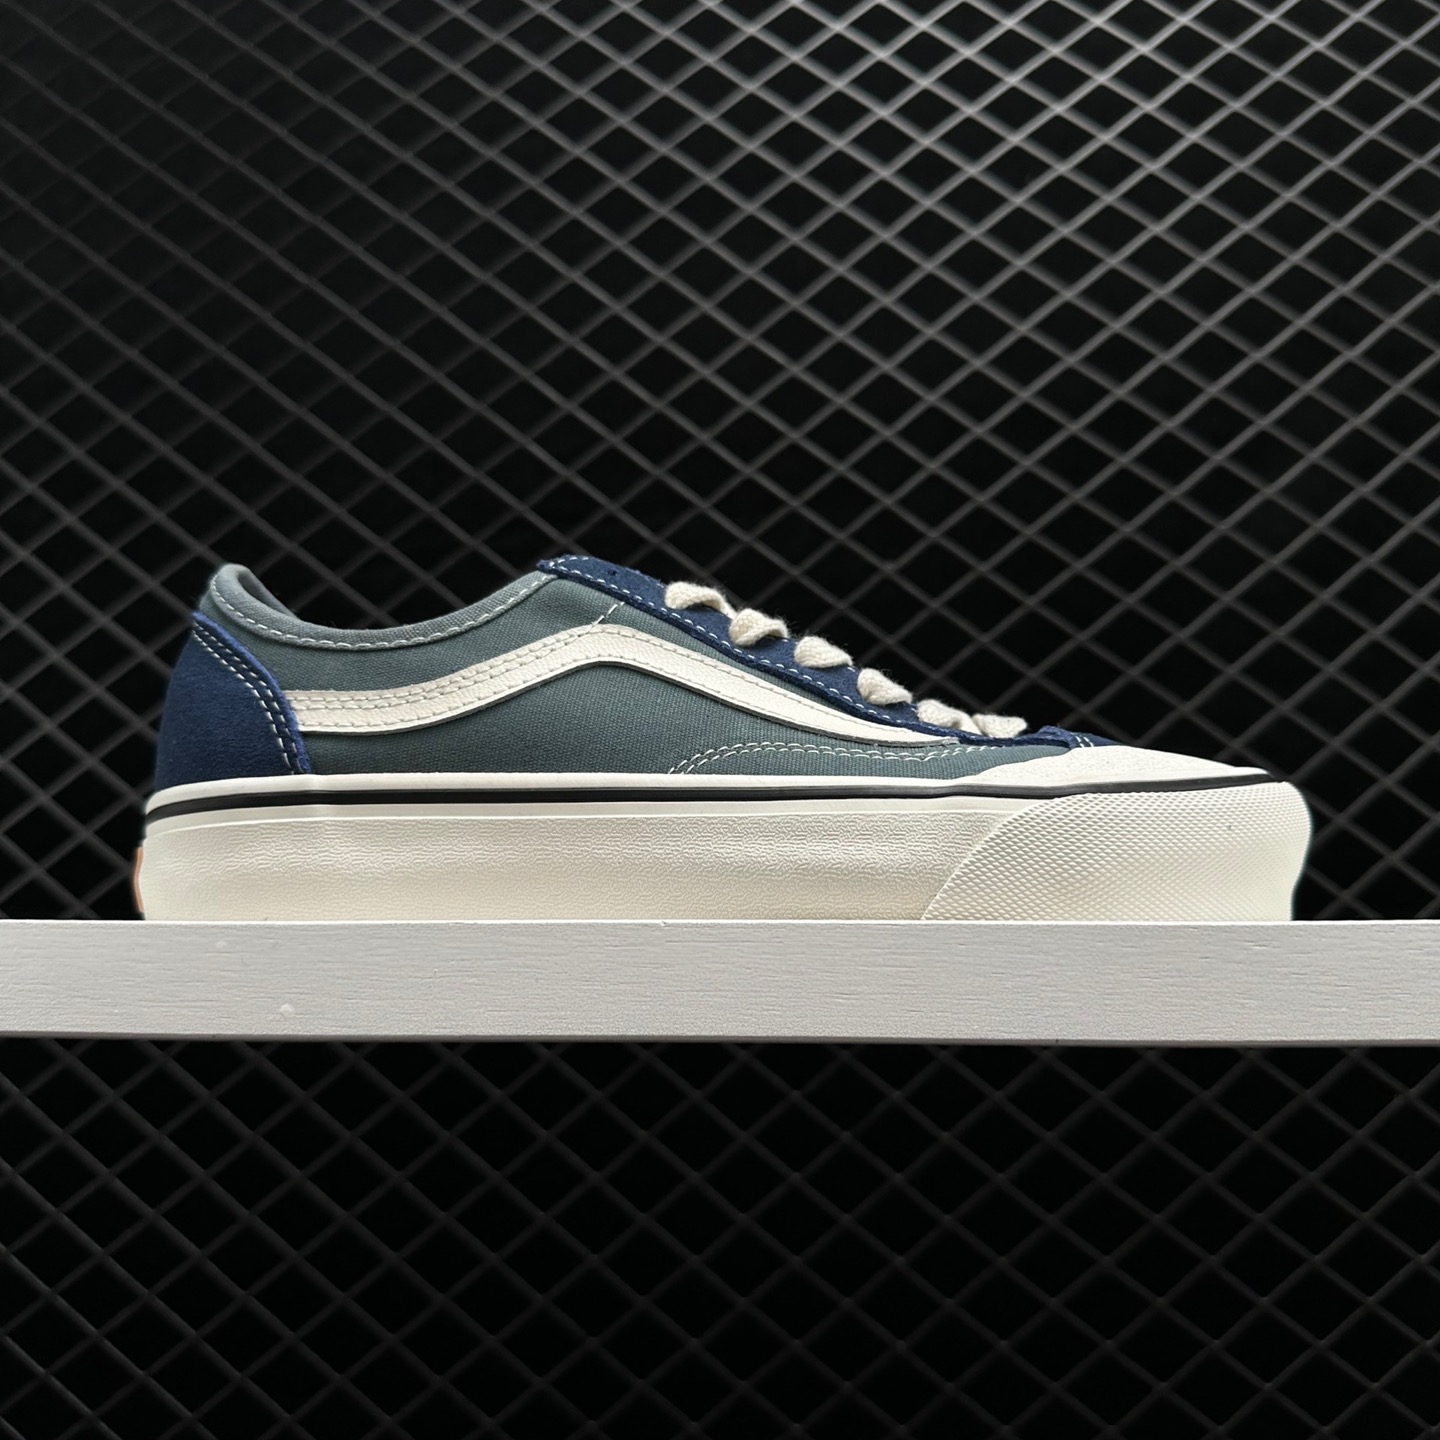 Vans Style 136 Decon Vr3 SF 'Blue White' VN0A4BX9DDN - Classic Skate Shoes | Free Shipping